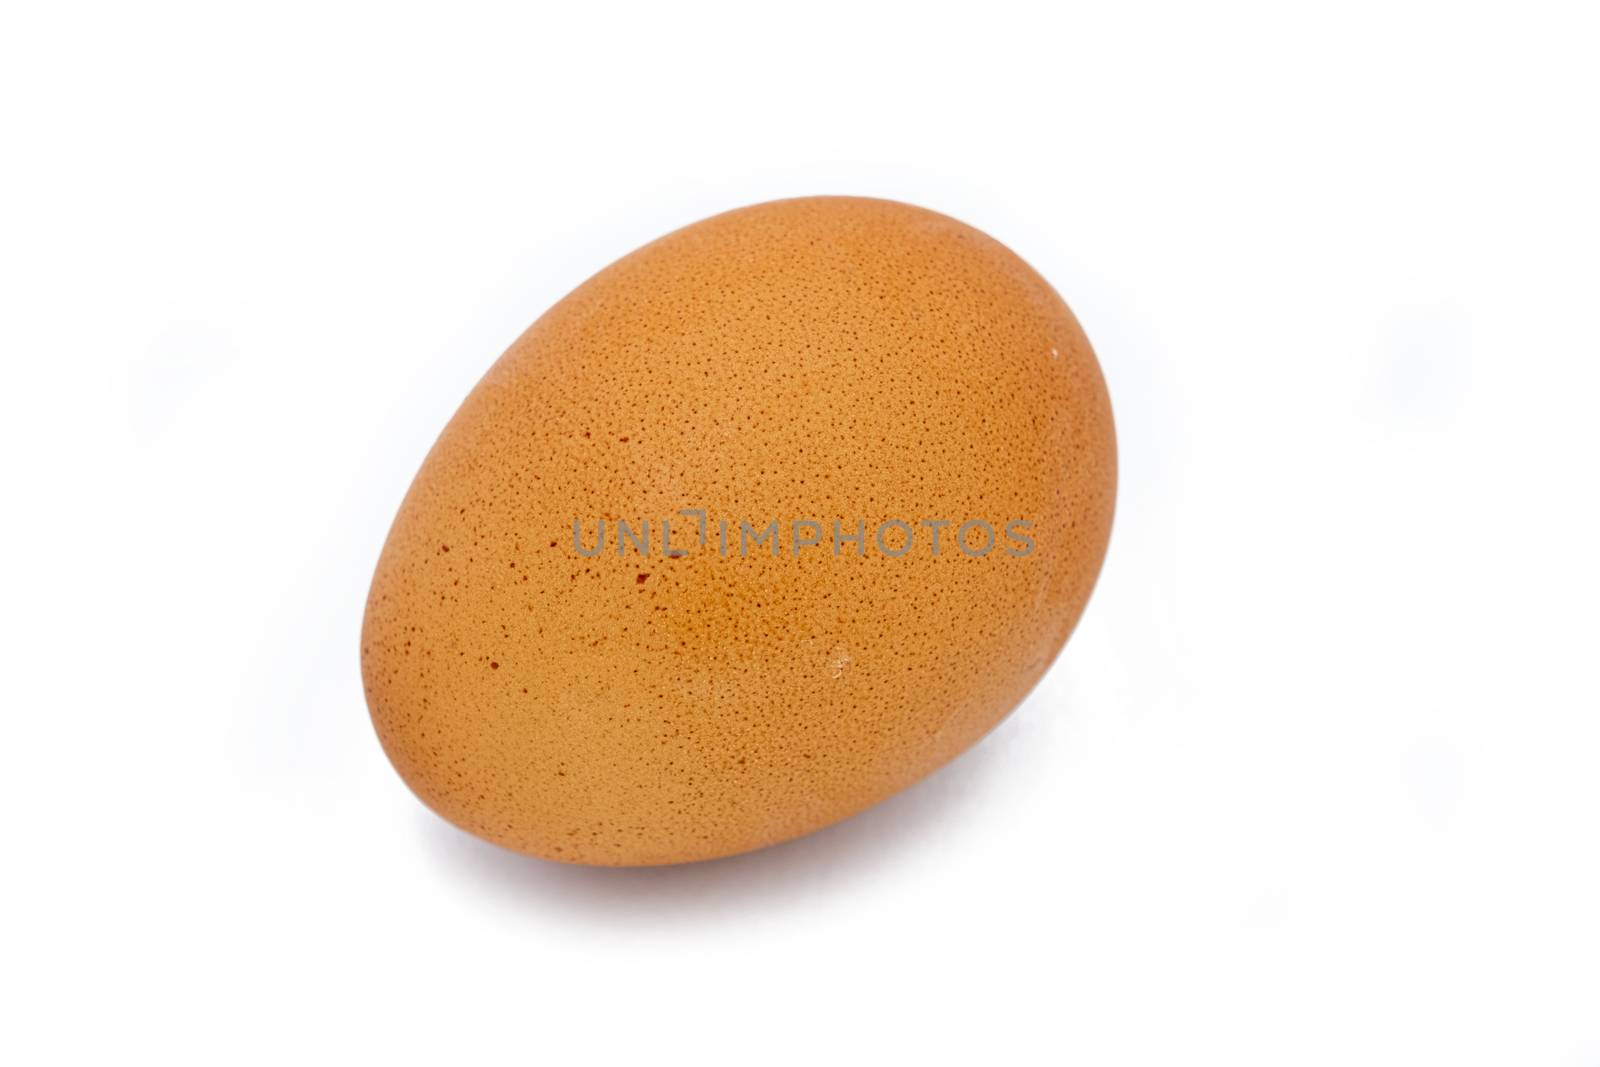 Close up chicken egg isolated on white background by peerapixs